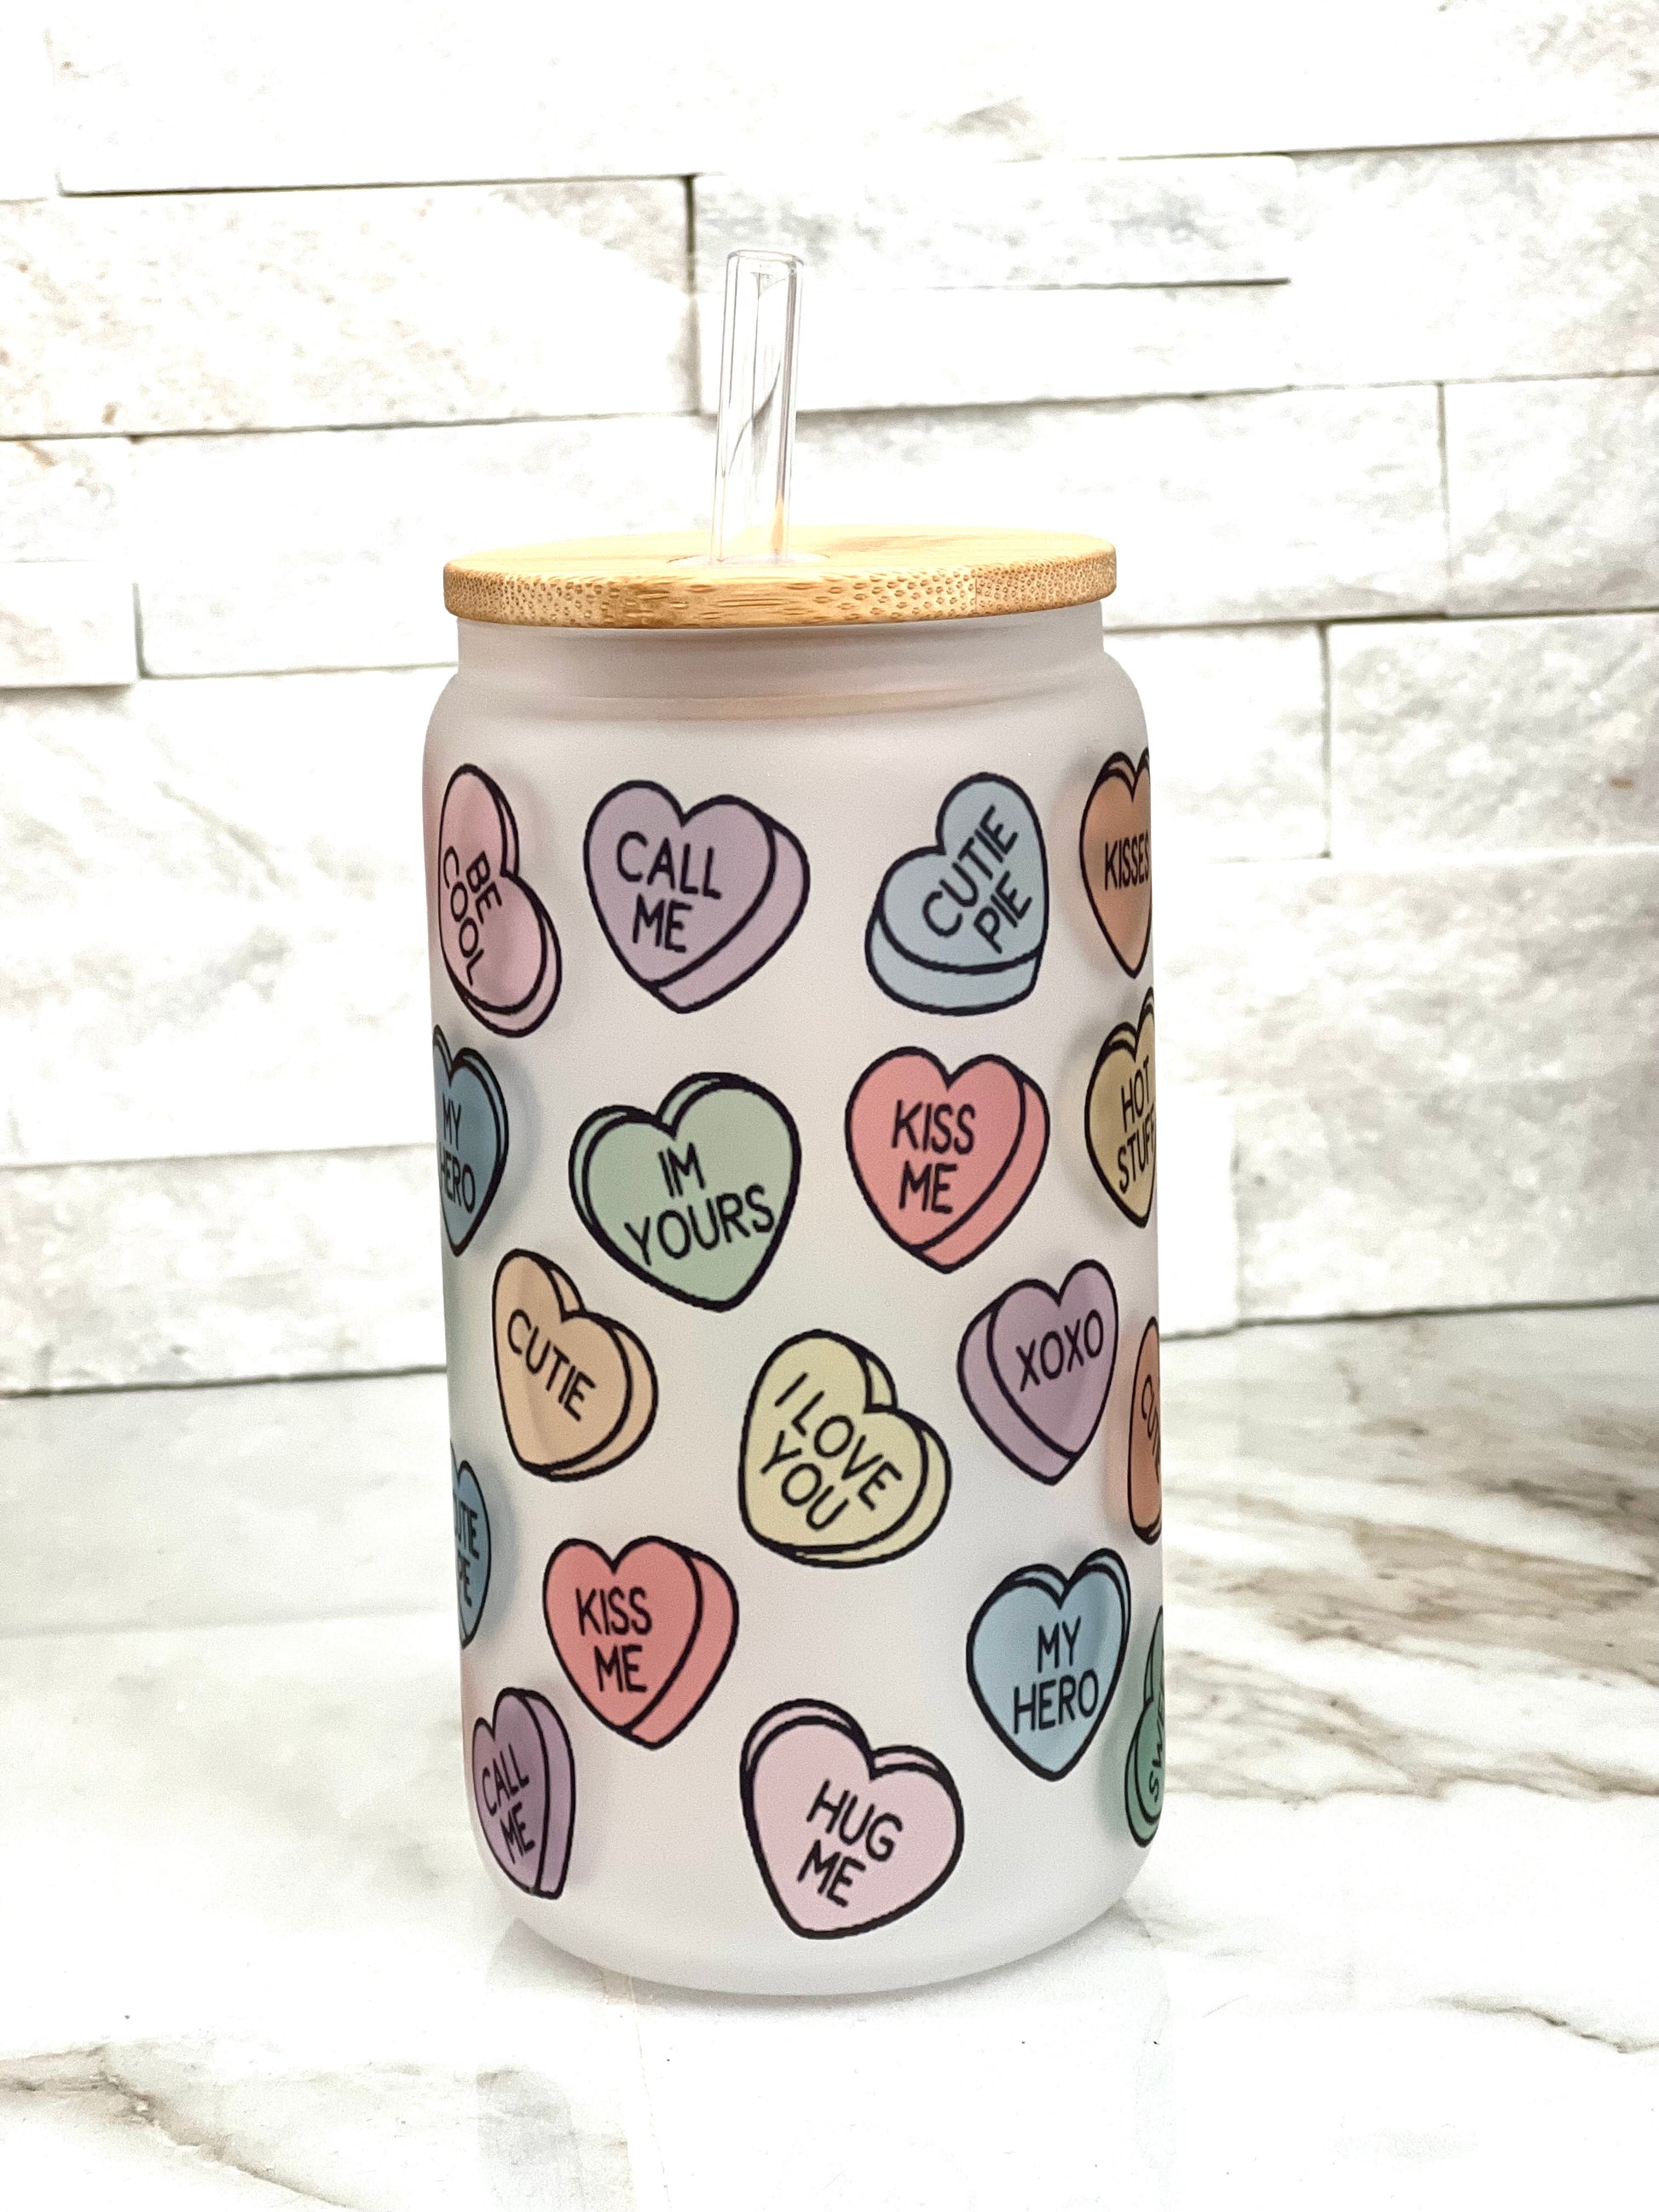 Made from durable glass, the can is durable and perfect for storing your favourite drinks. Not only does it look stylish, but its also eco-friendly. The Bamboo lid helps keep your drink fresh and prevents spills from happening. Plus, it has a leak-proof design so you don't have to worry about spilling at all. With our conversation hearts frosted glass can, you'll never miss out on a good drink again!